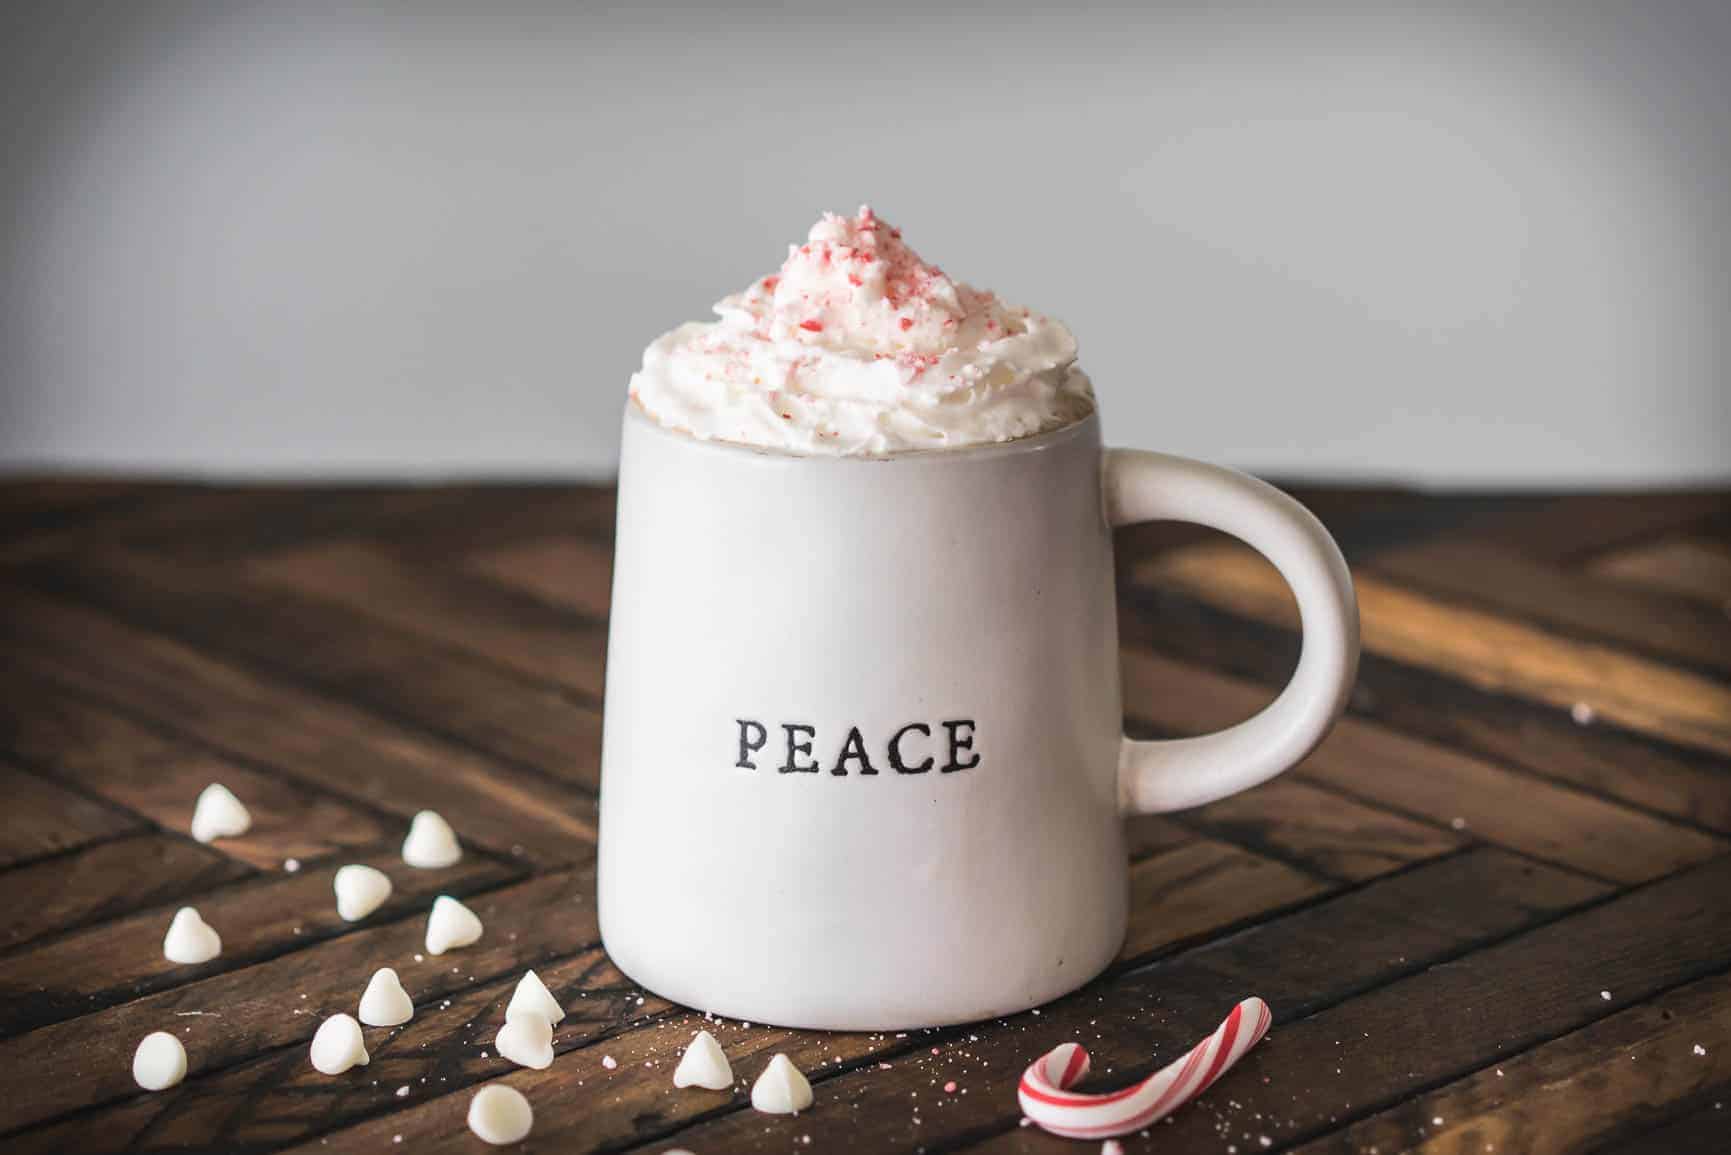 Holiday White Chocolate Peppermint Pour Over Coffee